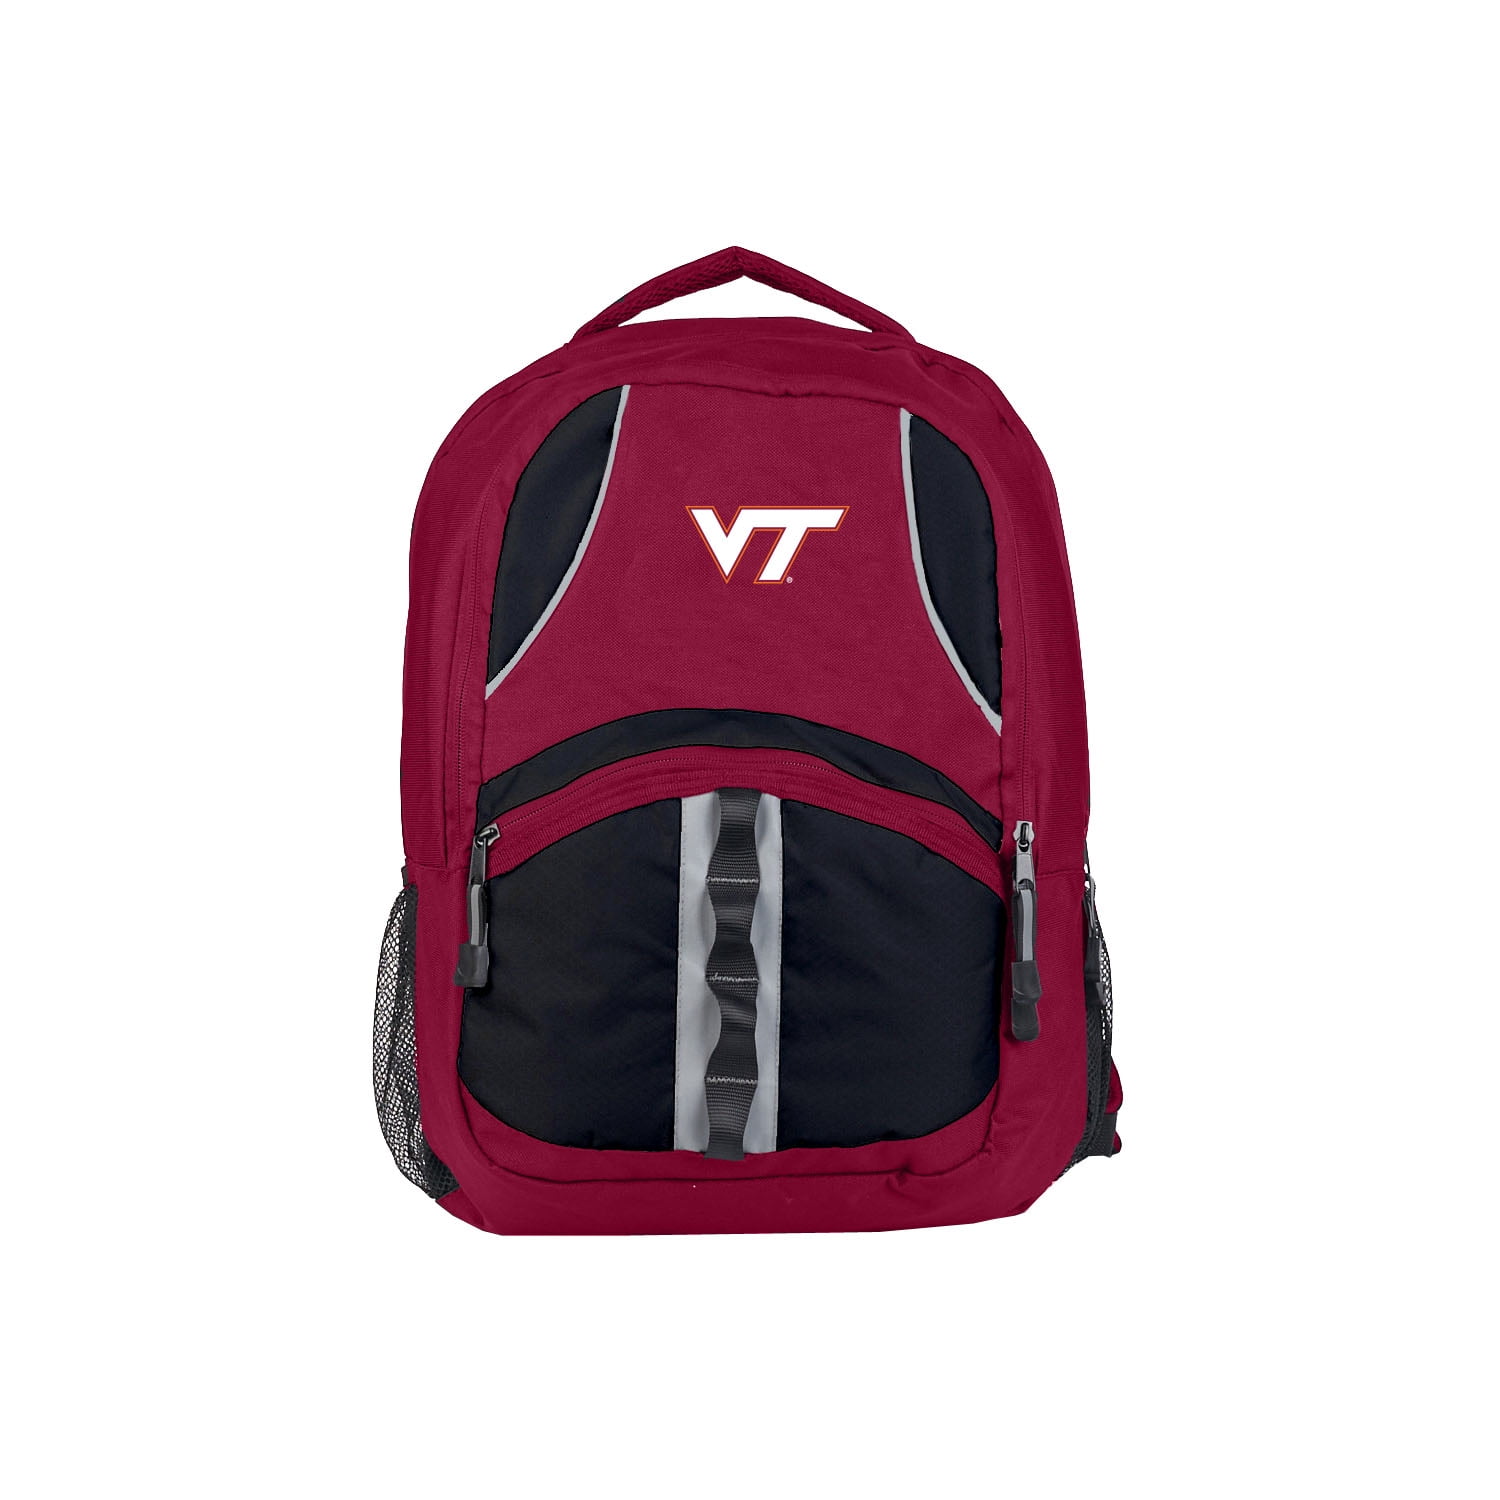 The Northwest Company Officially Licensed NCAA Captain Backpack 